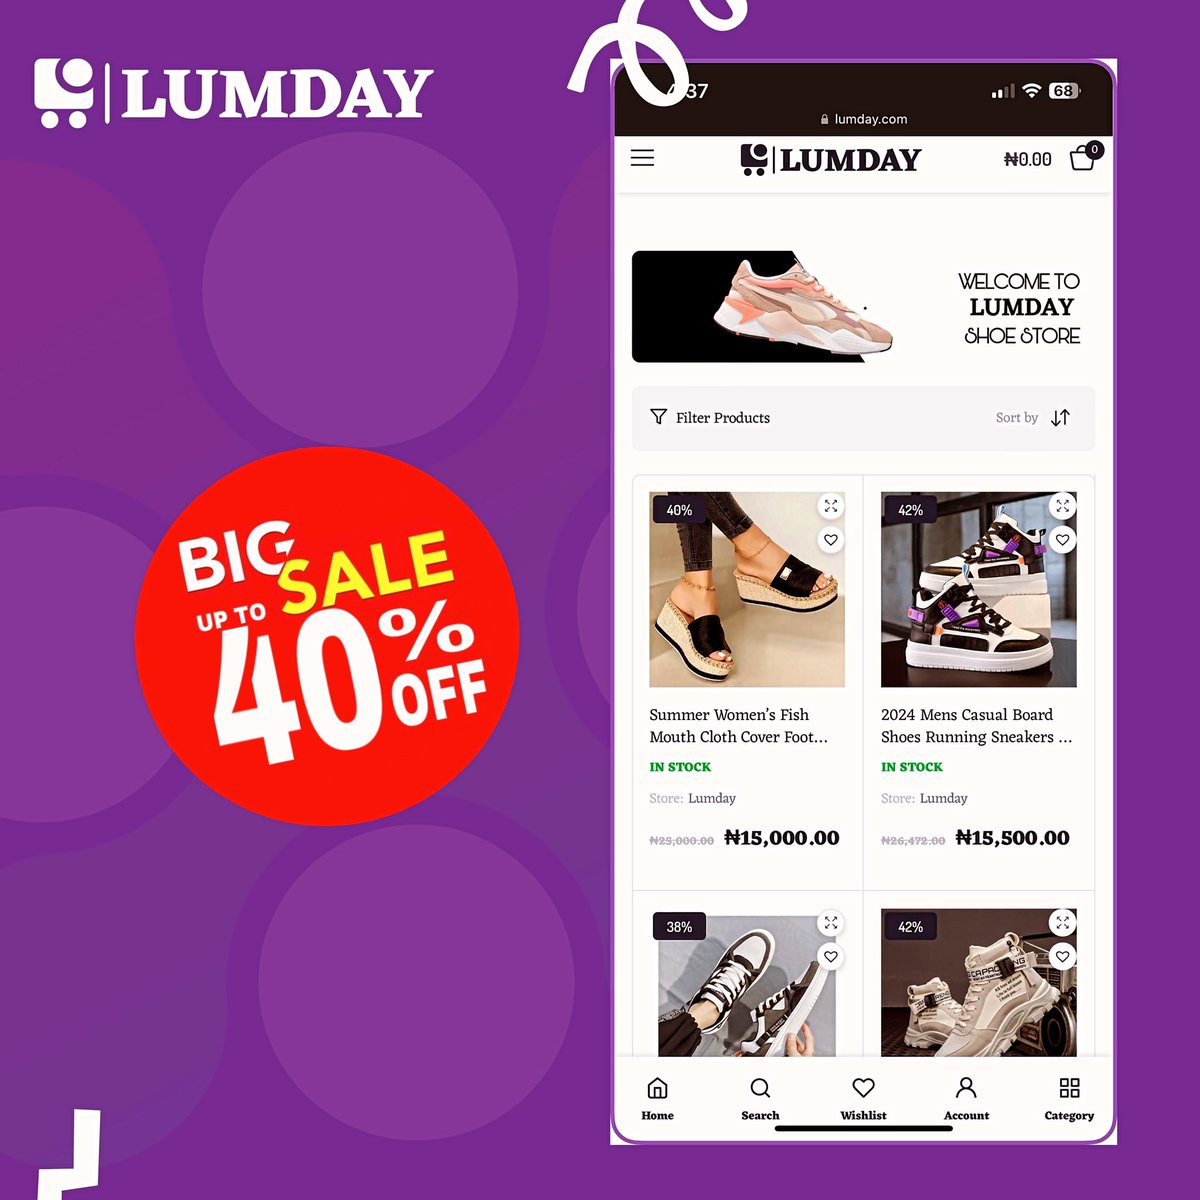 Step into style with Lumday’s Shoe Extravaganza! 👞✨ Enjoy up to 40% off on our chic collection. Time to elevate your shoe game! #ShoeSale #LumdayStyle #lumday #Valentines2024 #GRAMMYs  #GRAMMYs2024